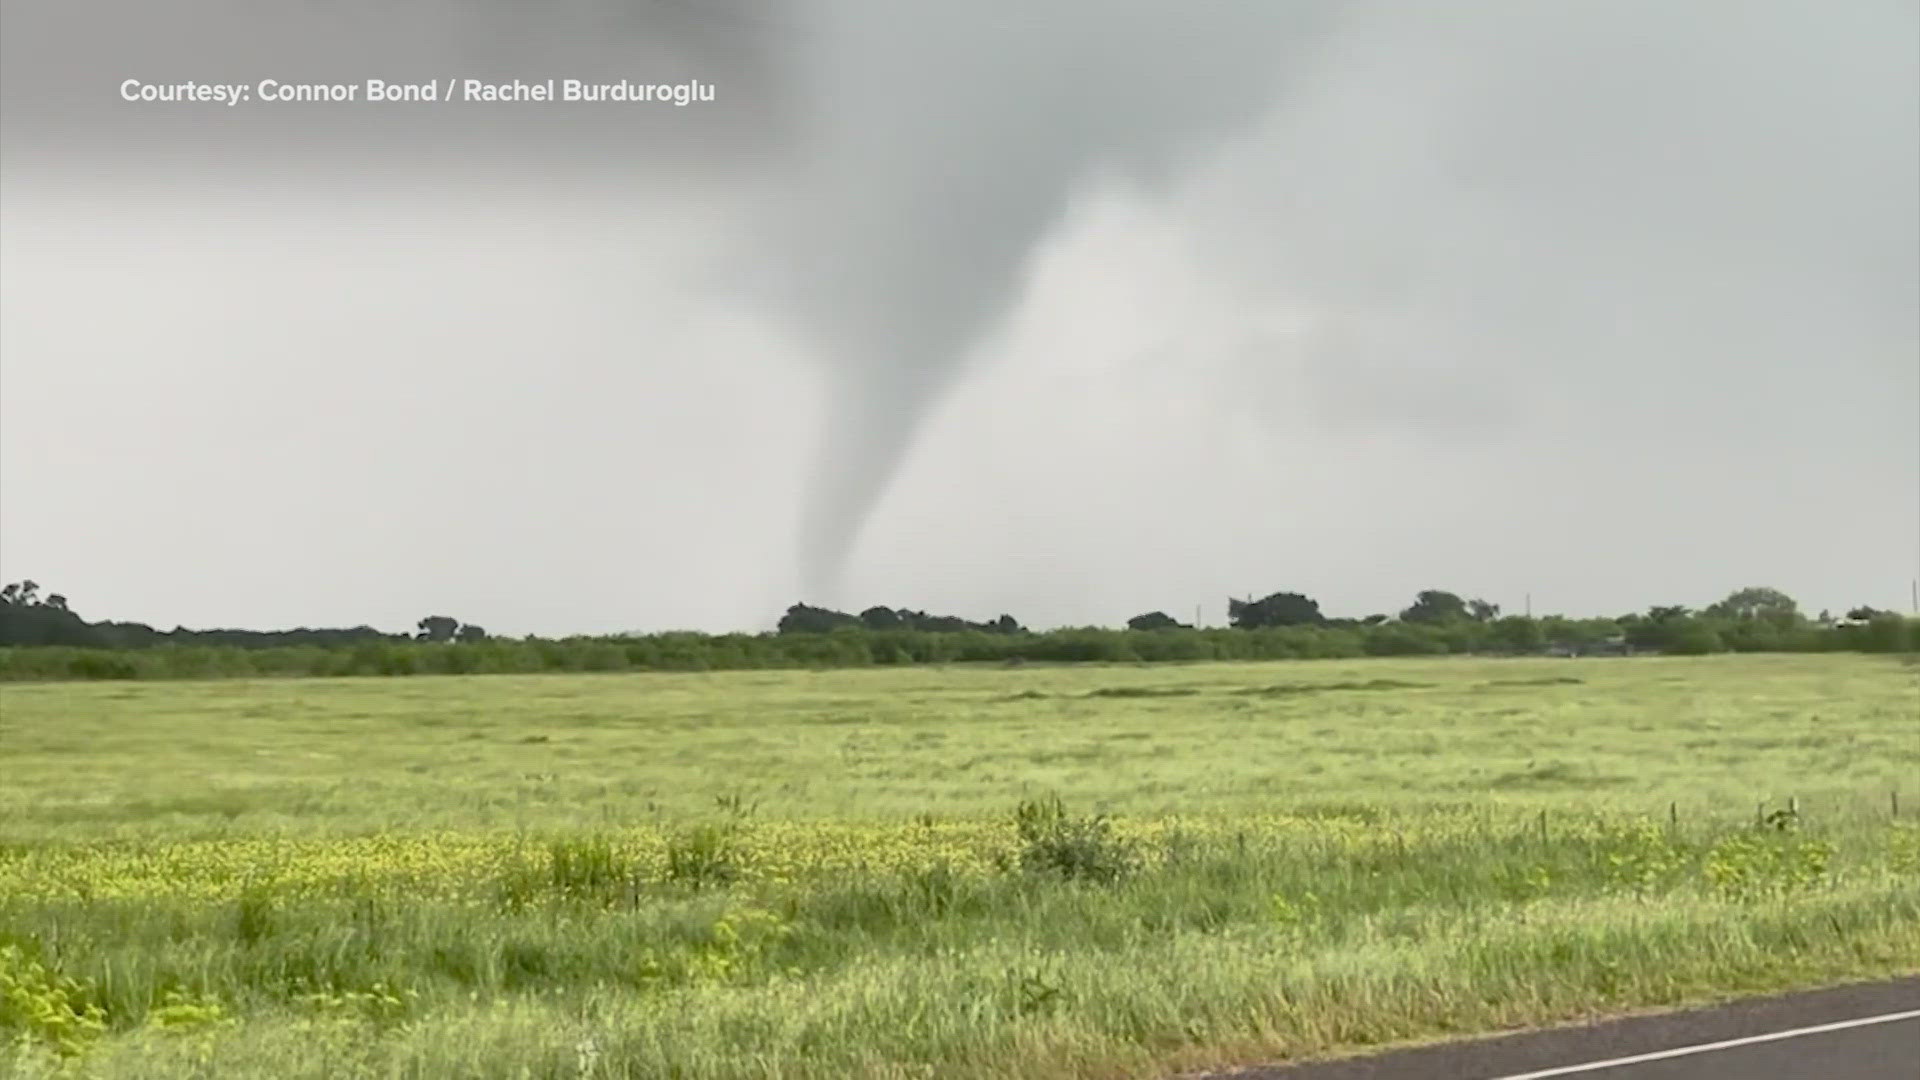 The tornado was spotted just north of Waco.